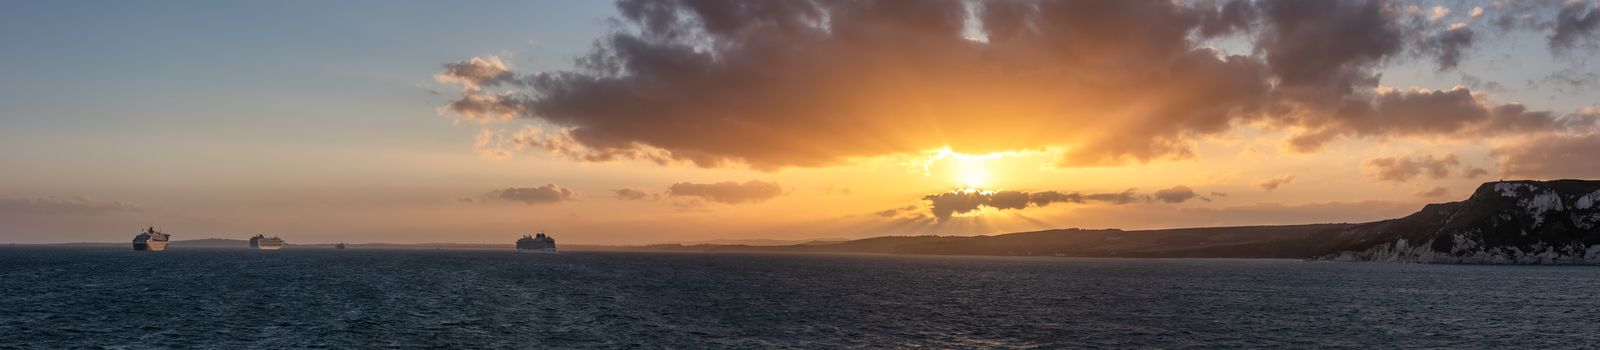 Beautiful sunset panorama of coast line in Weymouth Bay, UK. Gorgeous orange and yellow colors. Cruise ship anchored in the distance.